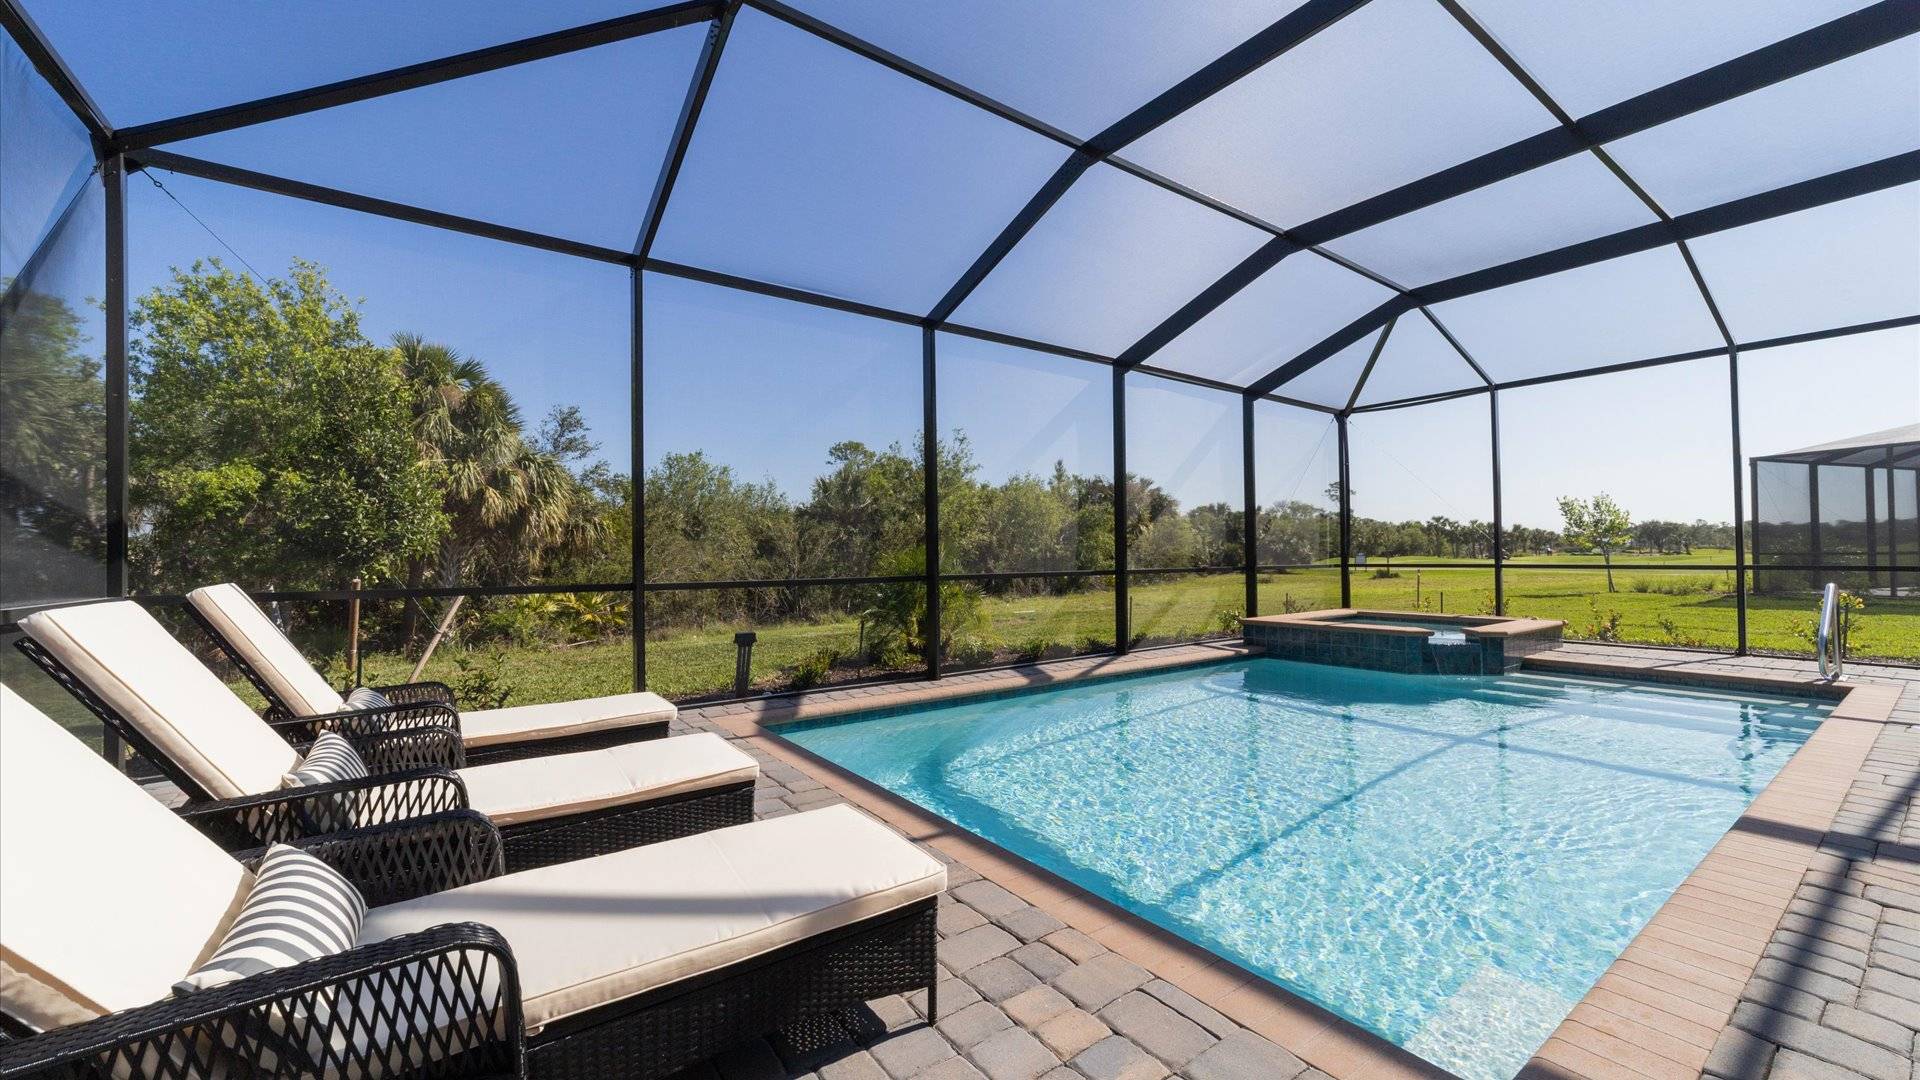 Soak up the Florida sunshine overlooking the pool and the 9th hole on the golf course